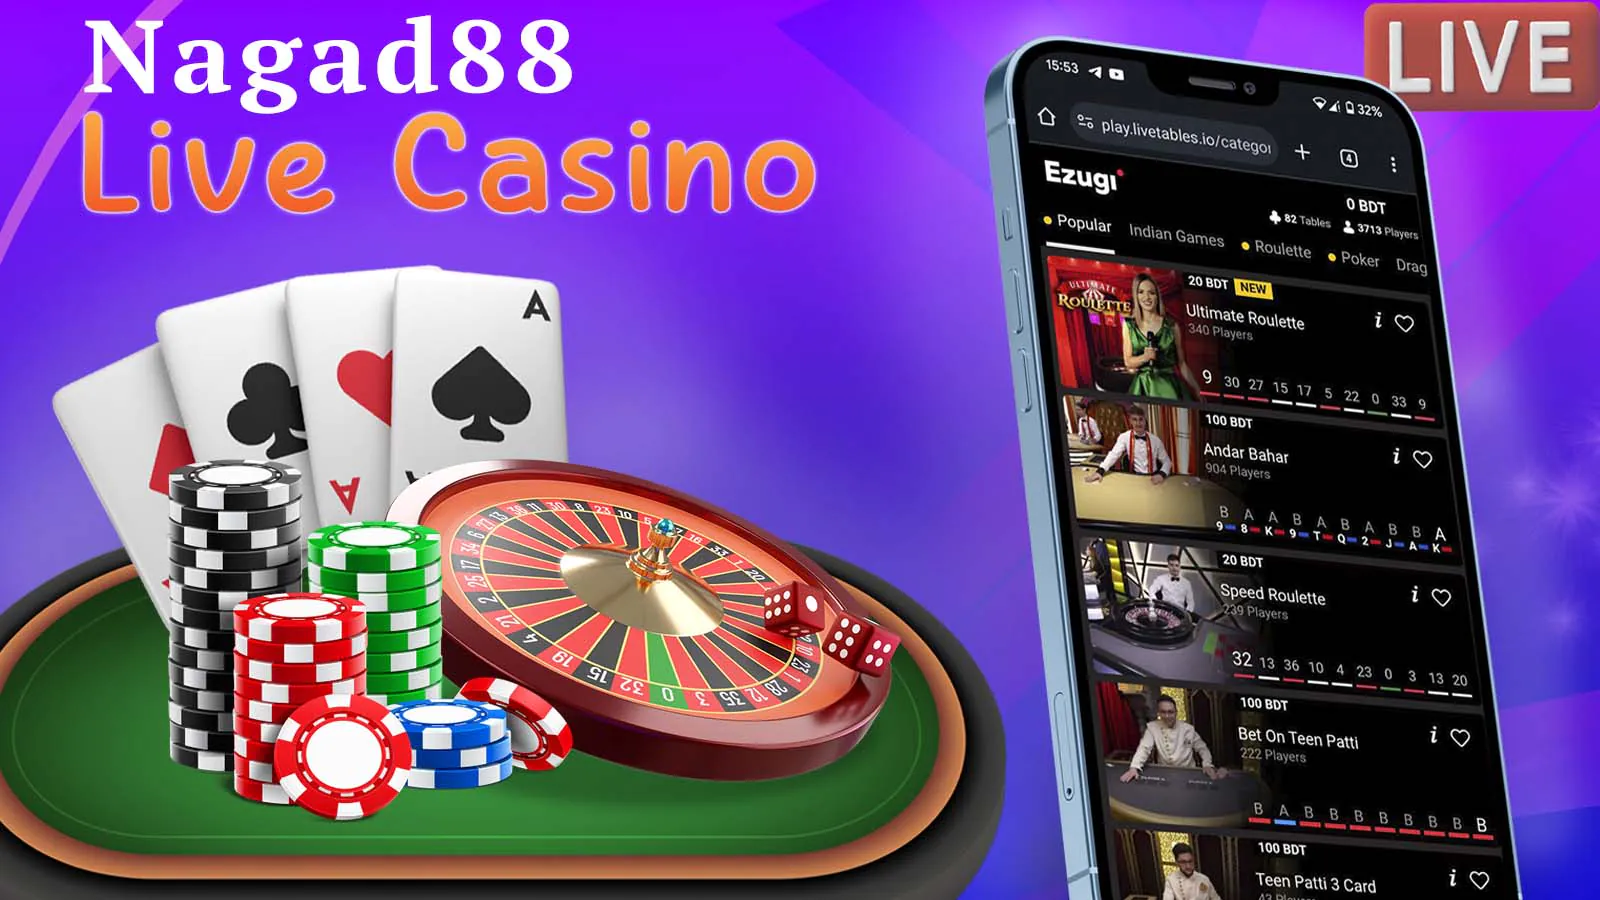 Live games with real dealers in Nagad88 Live Casino section